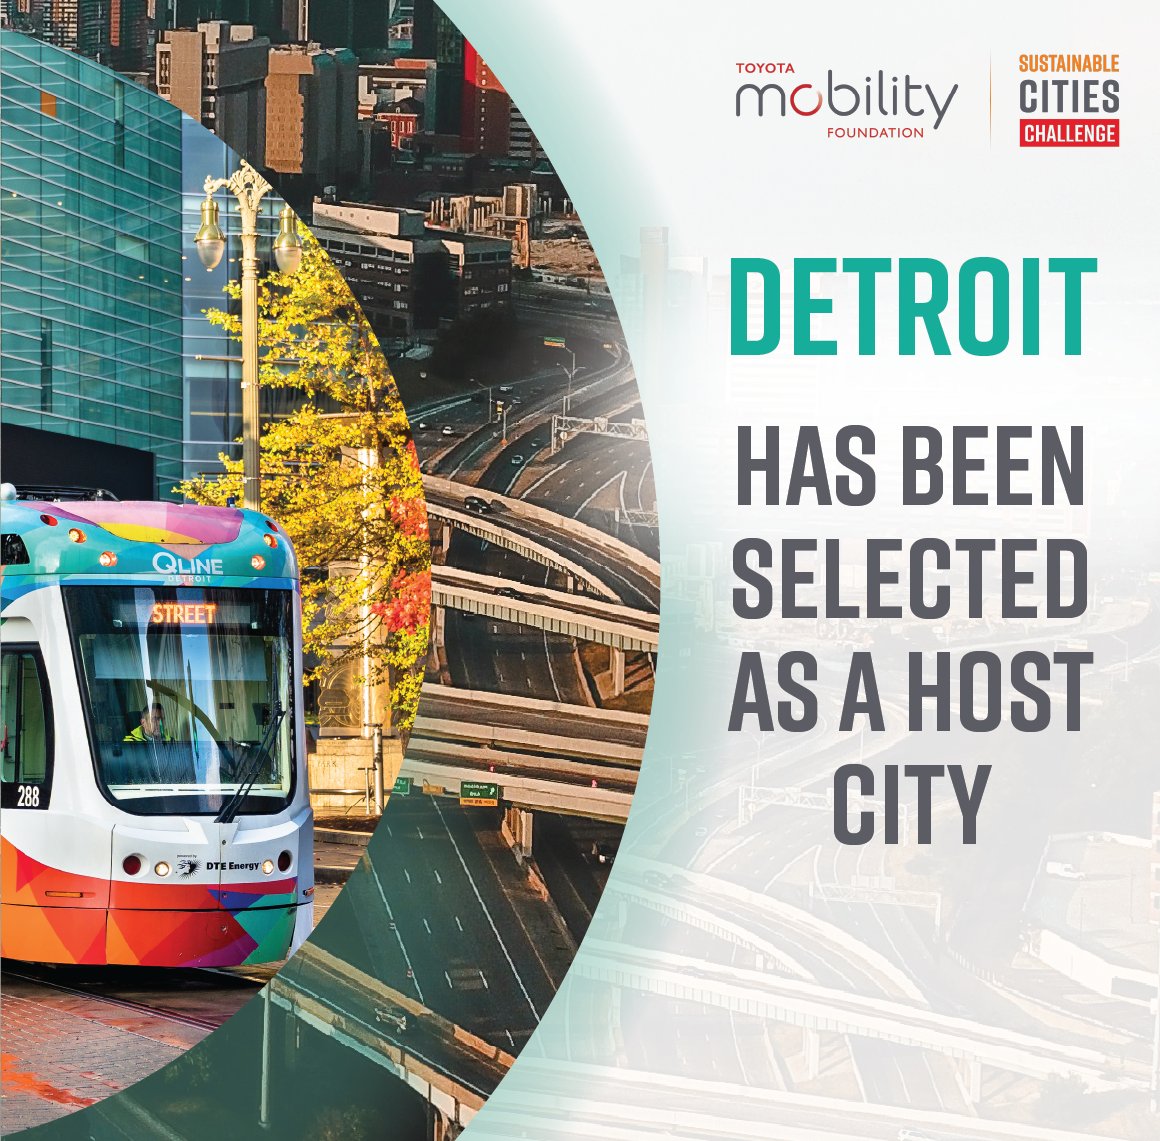 🎉 Exciting news: #Detroit has been selected as a host city for the #TMFSustainableCities Challenge! @WRIRossCities, @ToyotaMobFdn & @challenge_works are partnering to improve mobility in Detroit, making it more sustainable, safe & inclusive. 🌿🚗 🔗 bit.ly/4bbC0CC